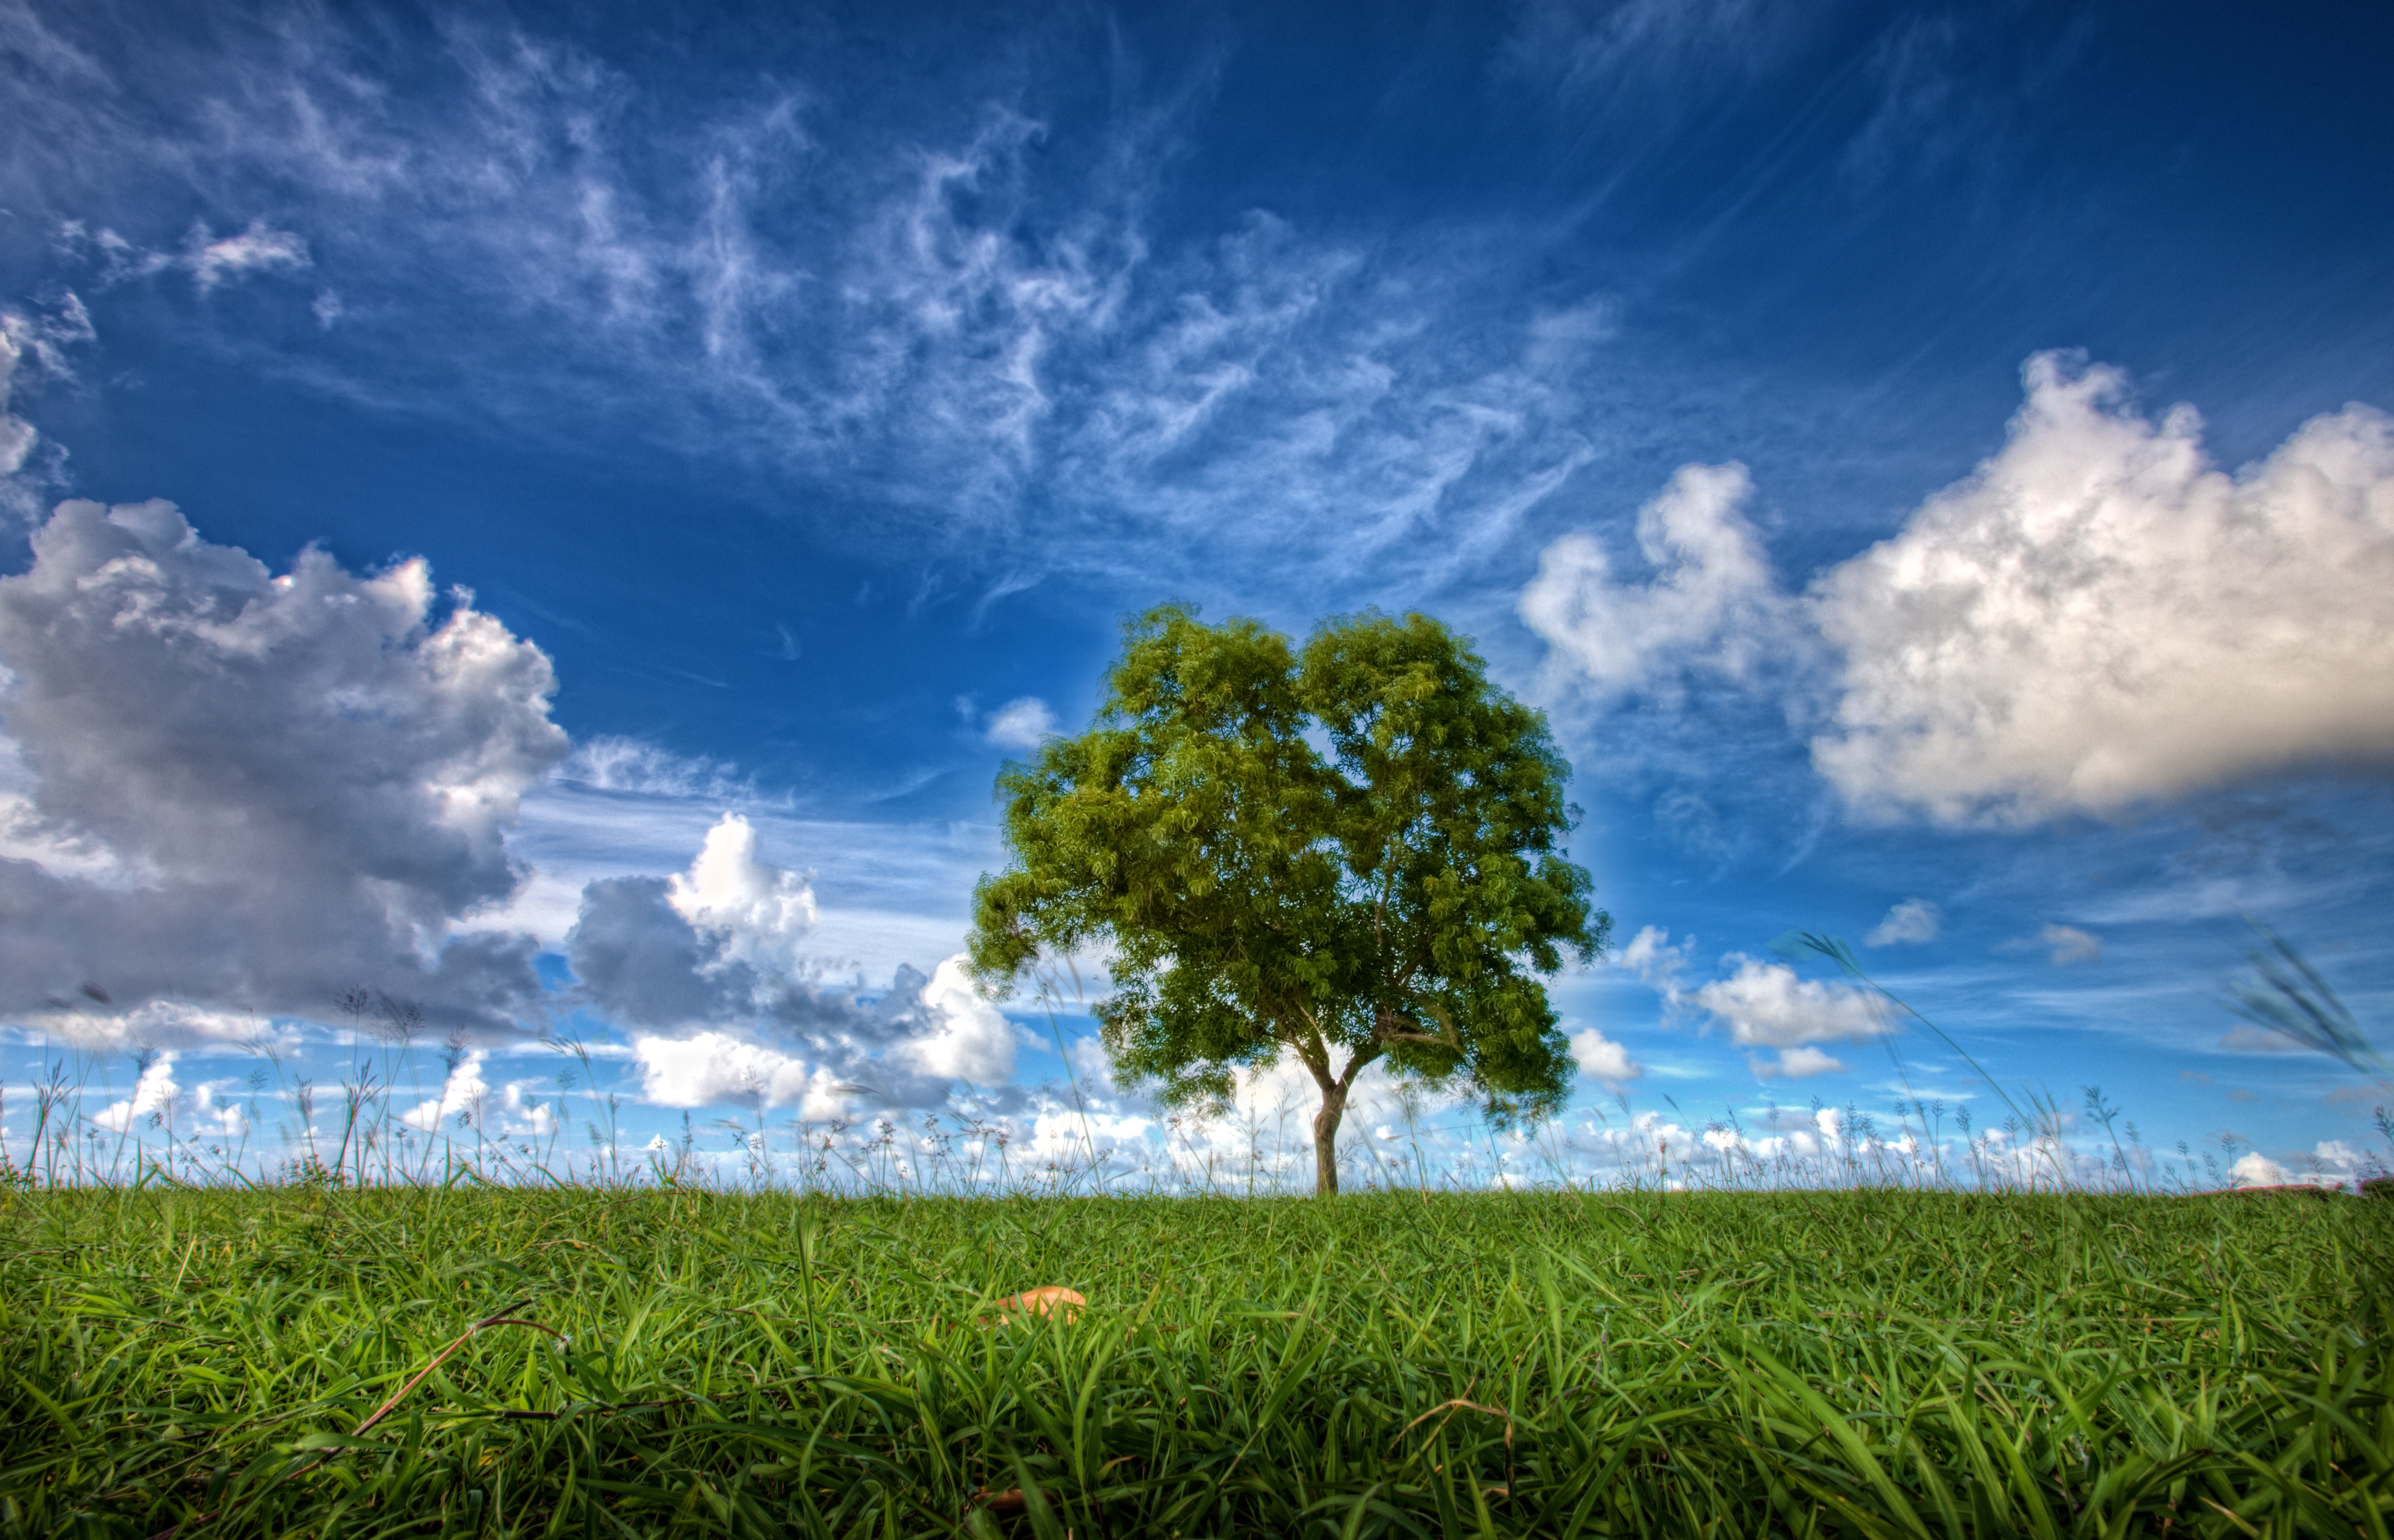 android field, tree, nature, sky, wood